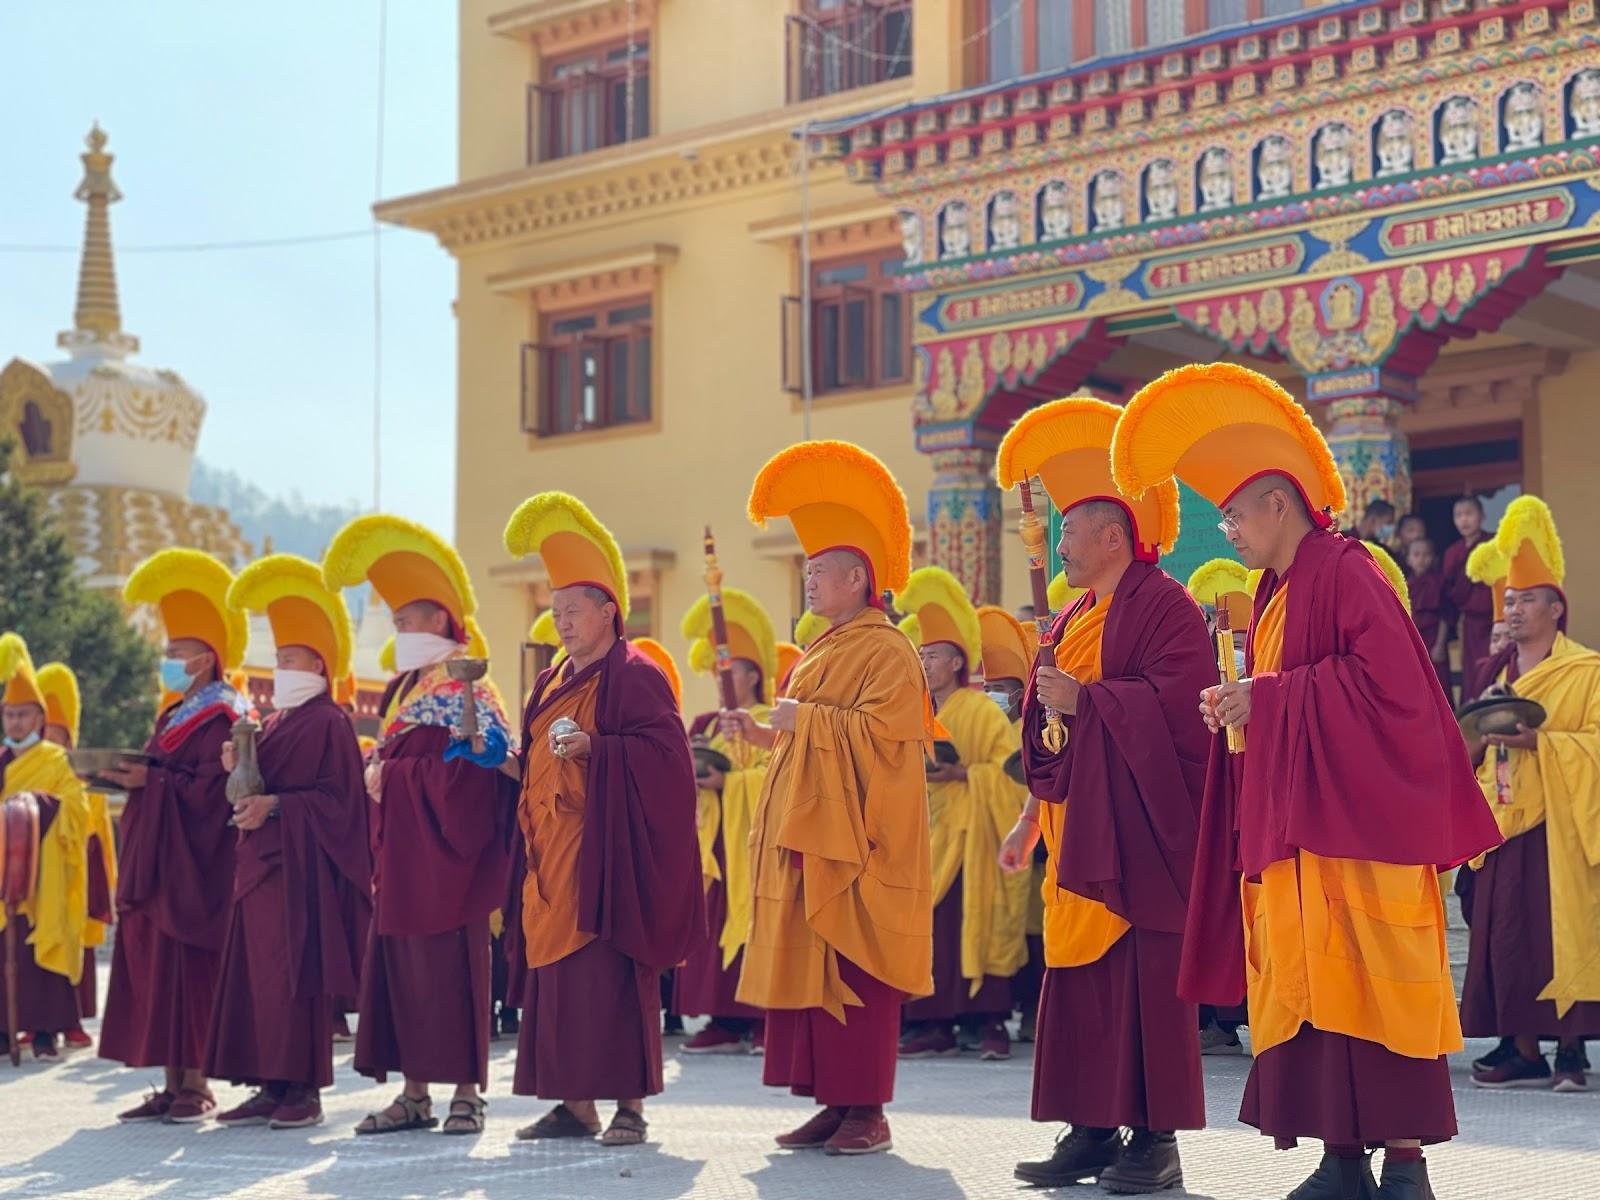 Buddhist monks wearing traditional garments and headdresses outside a temple in Nepal.